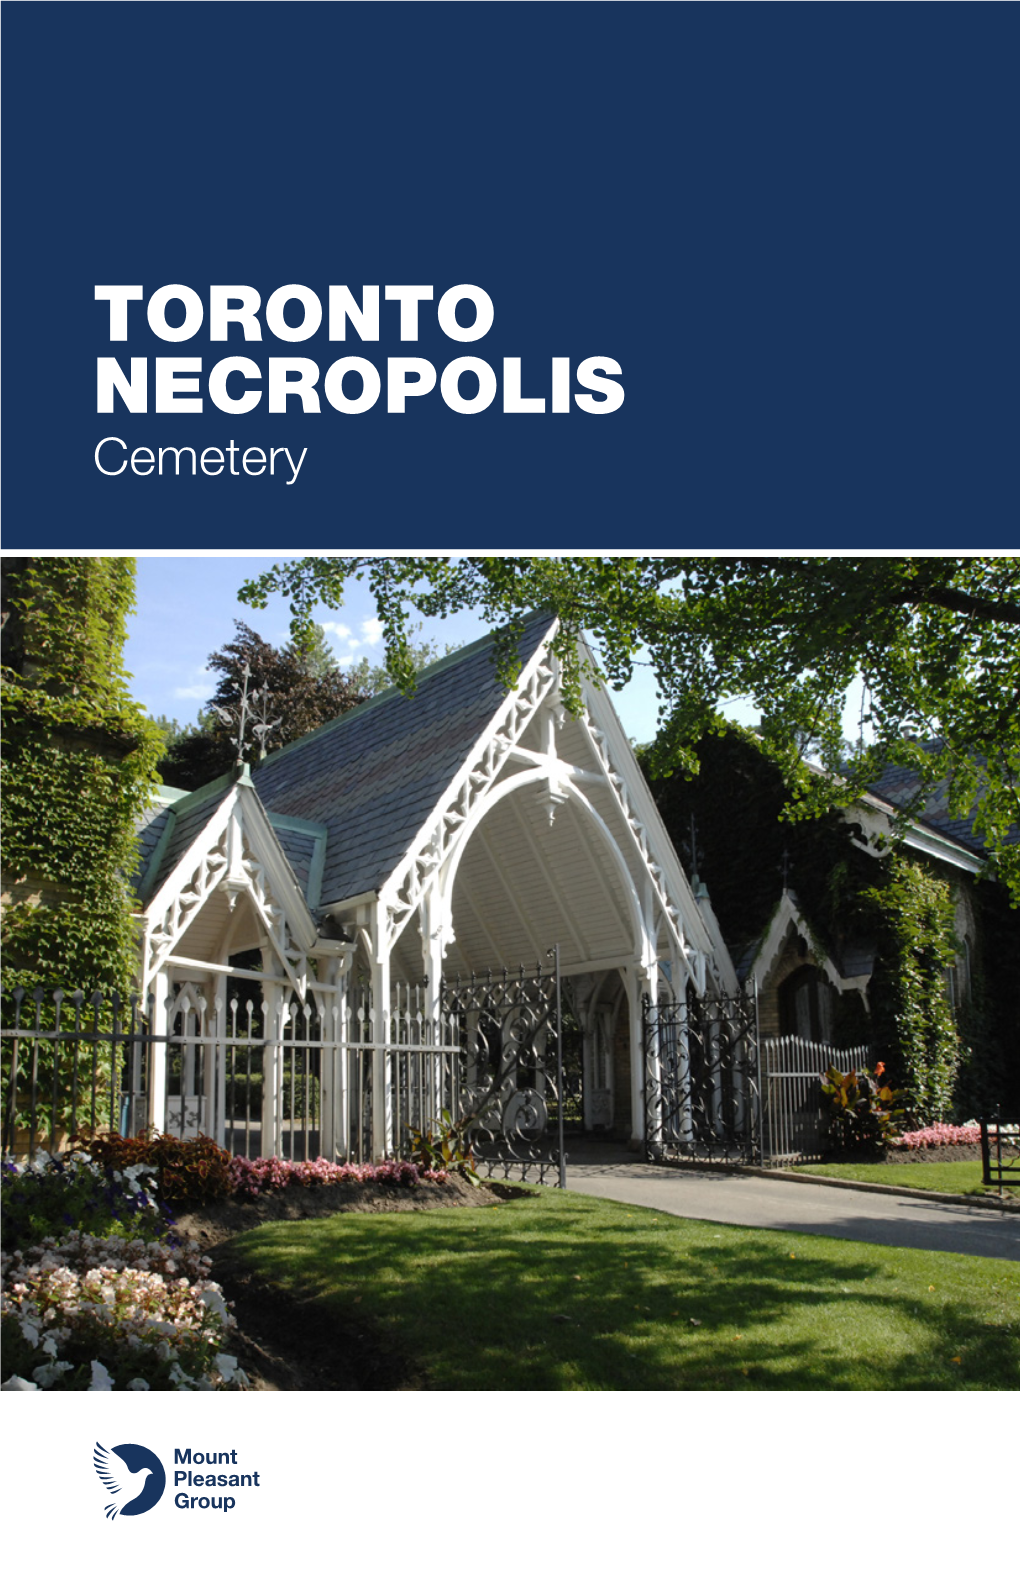 TORONTO NECROPOLIS Cemetery MORE THAN a LIVING MEMORIAL to PAST GENERATIONS, TORONTO NECROPOLIS IS ONE of the CUSTODIANS of OUR COUNTRY’S HISTORY